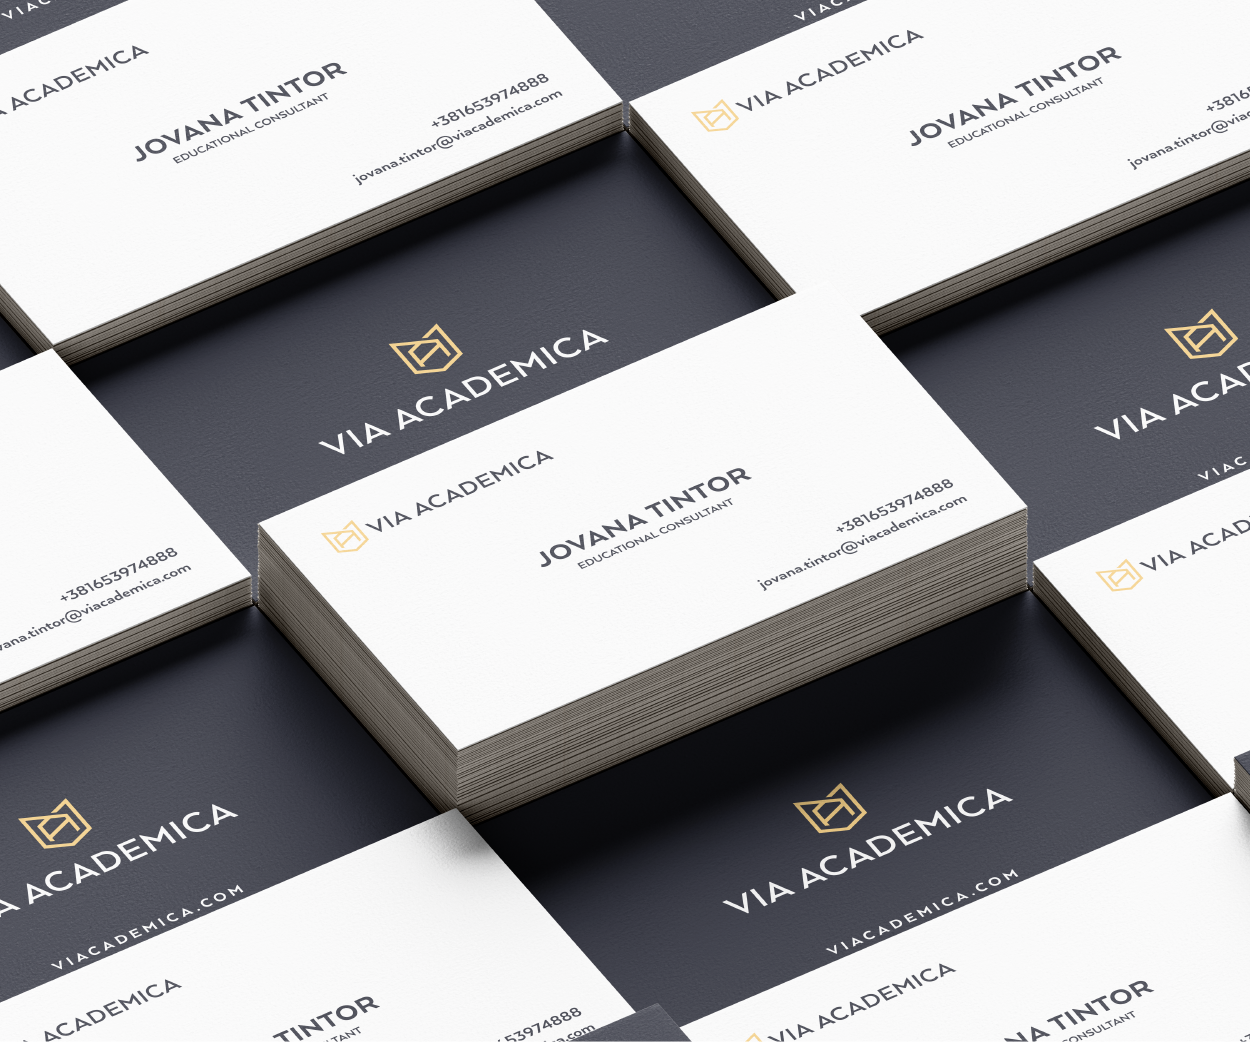 Via Academica - studying abroad and academic career orientation company Business Card Design Image